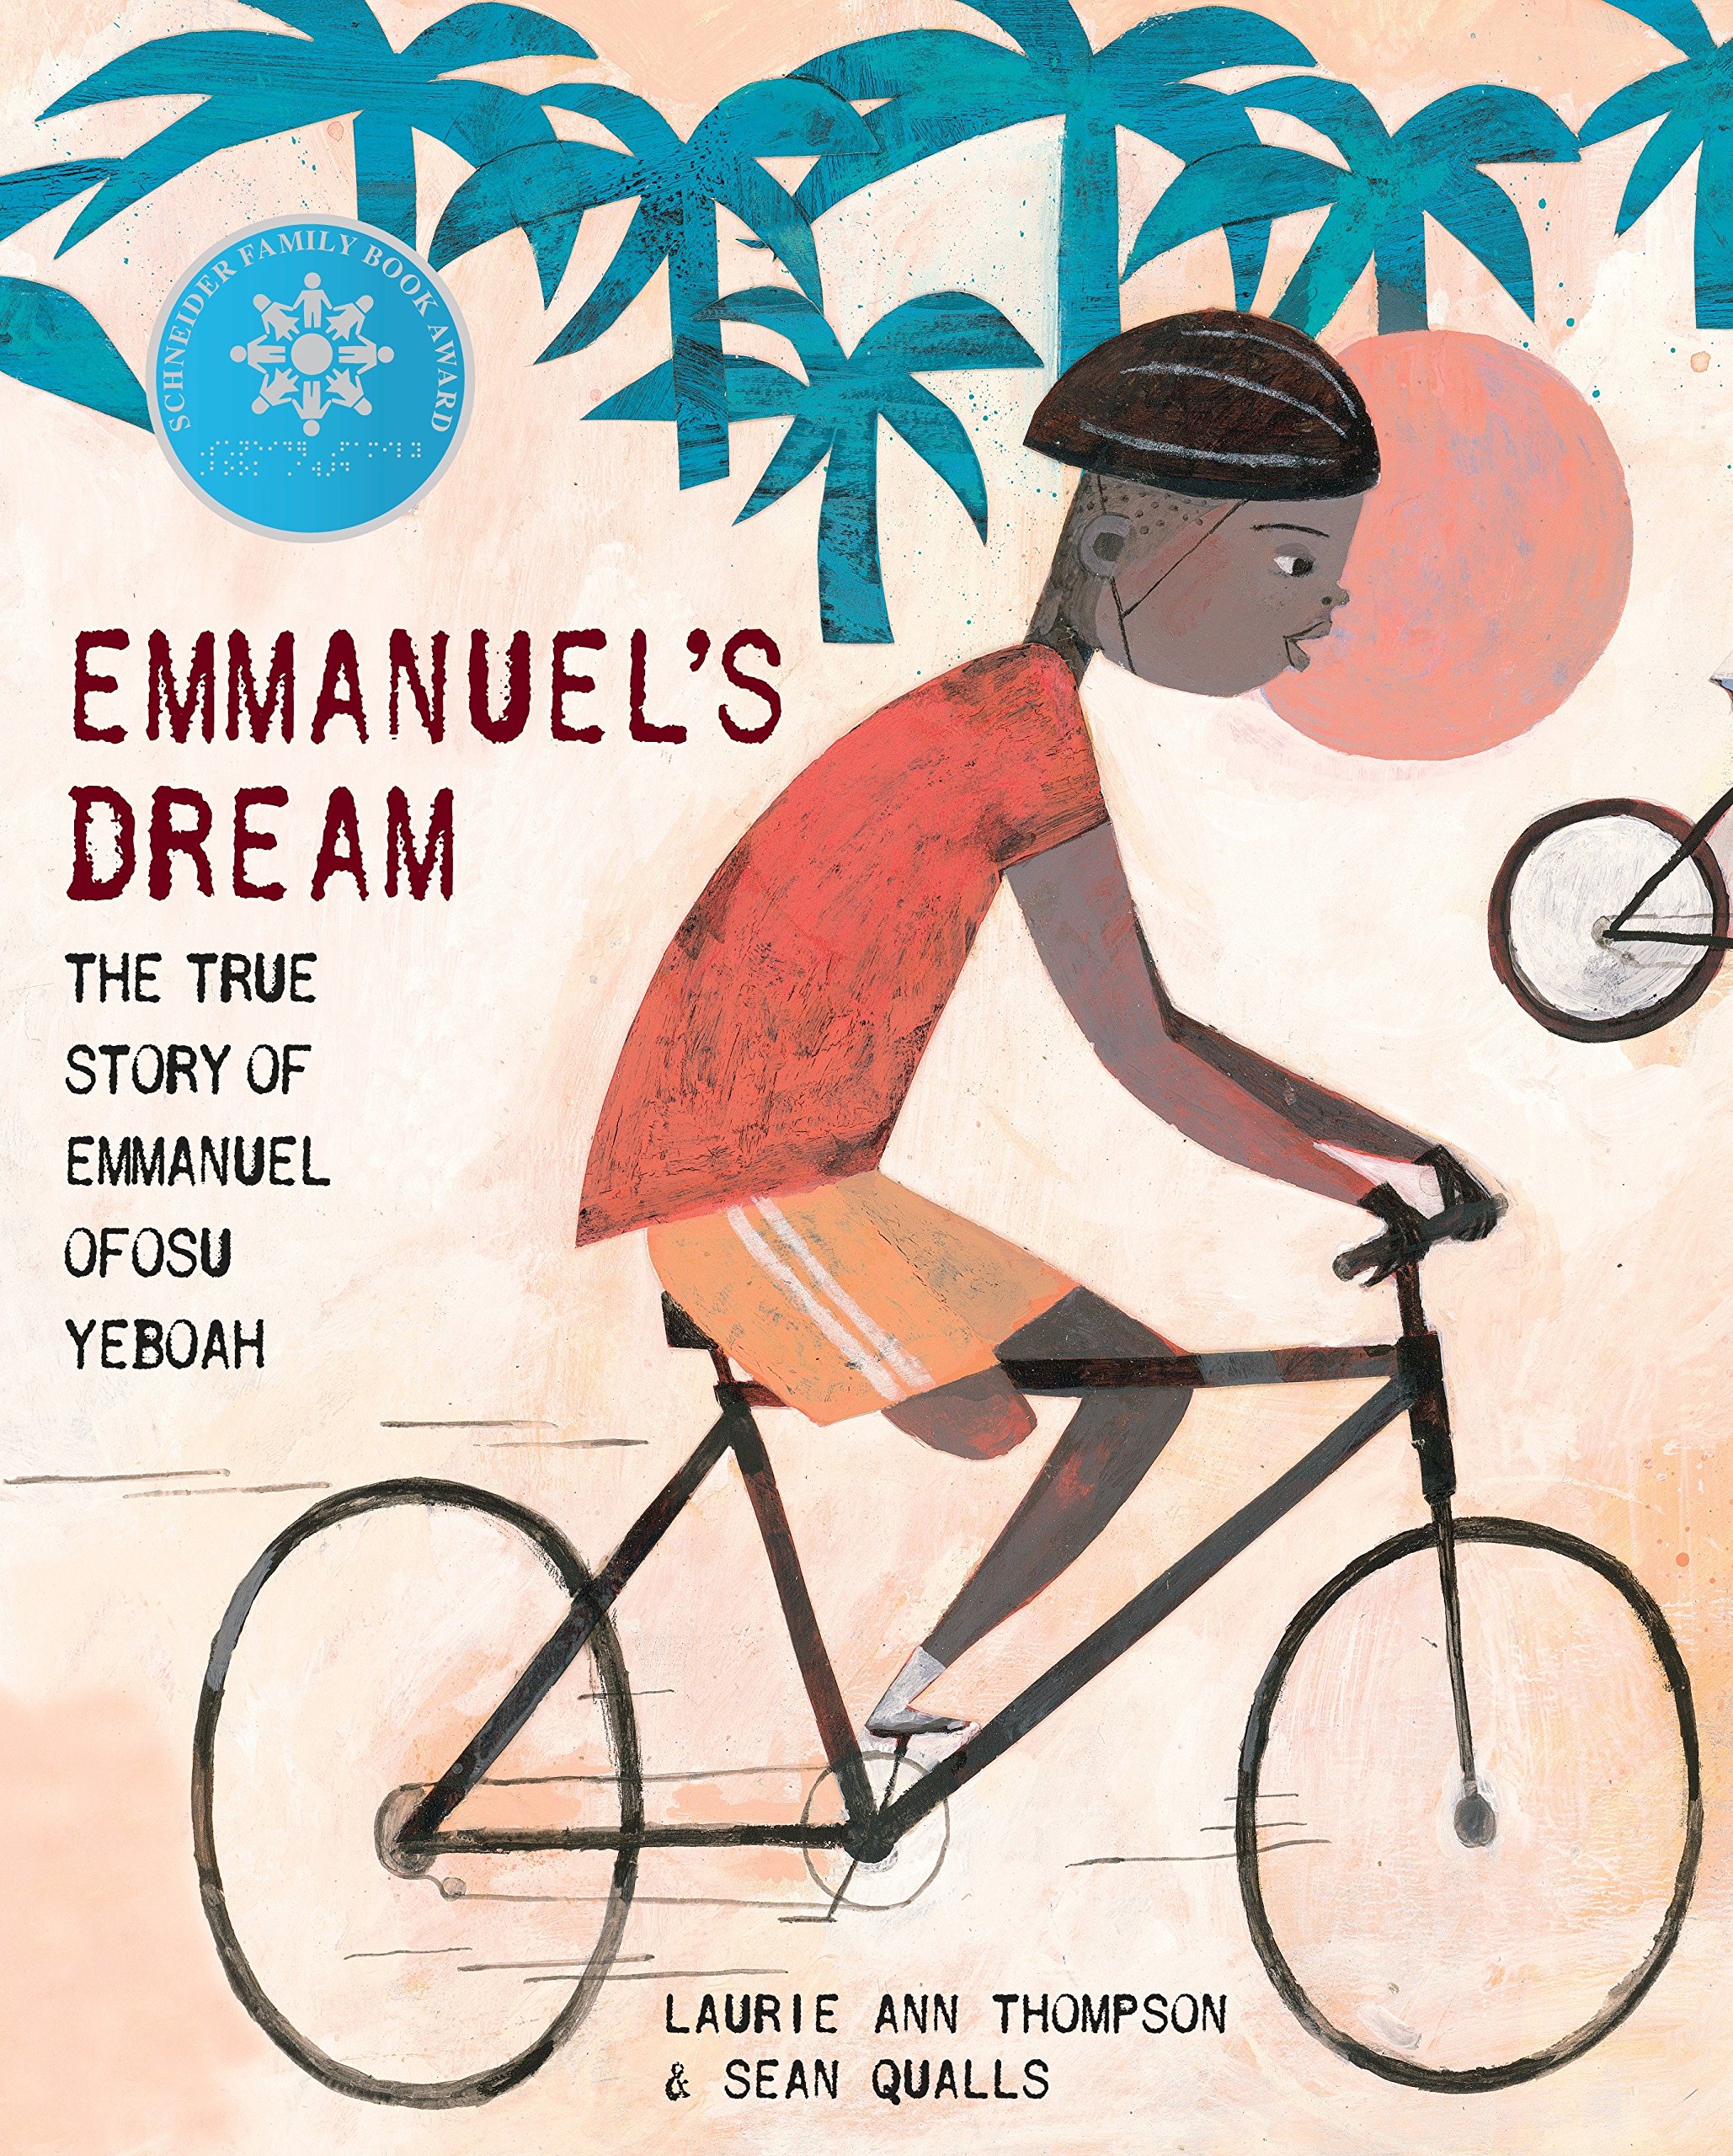 A cartoon boy wearing a red t-shirt riding a bike. One of his legs has a limb difference. The title reads Emmanuel's dream the true story of Emmanuel Ofosu Yeboah.